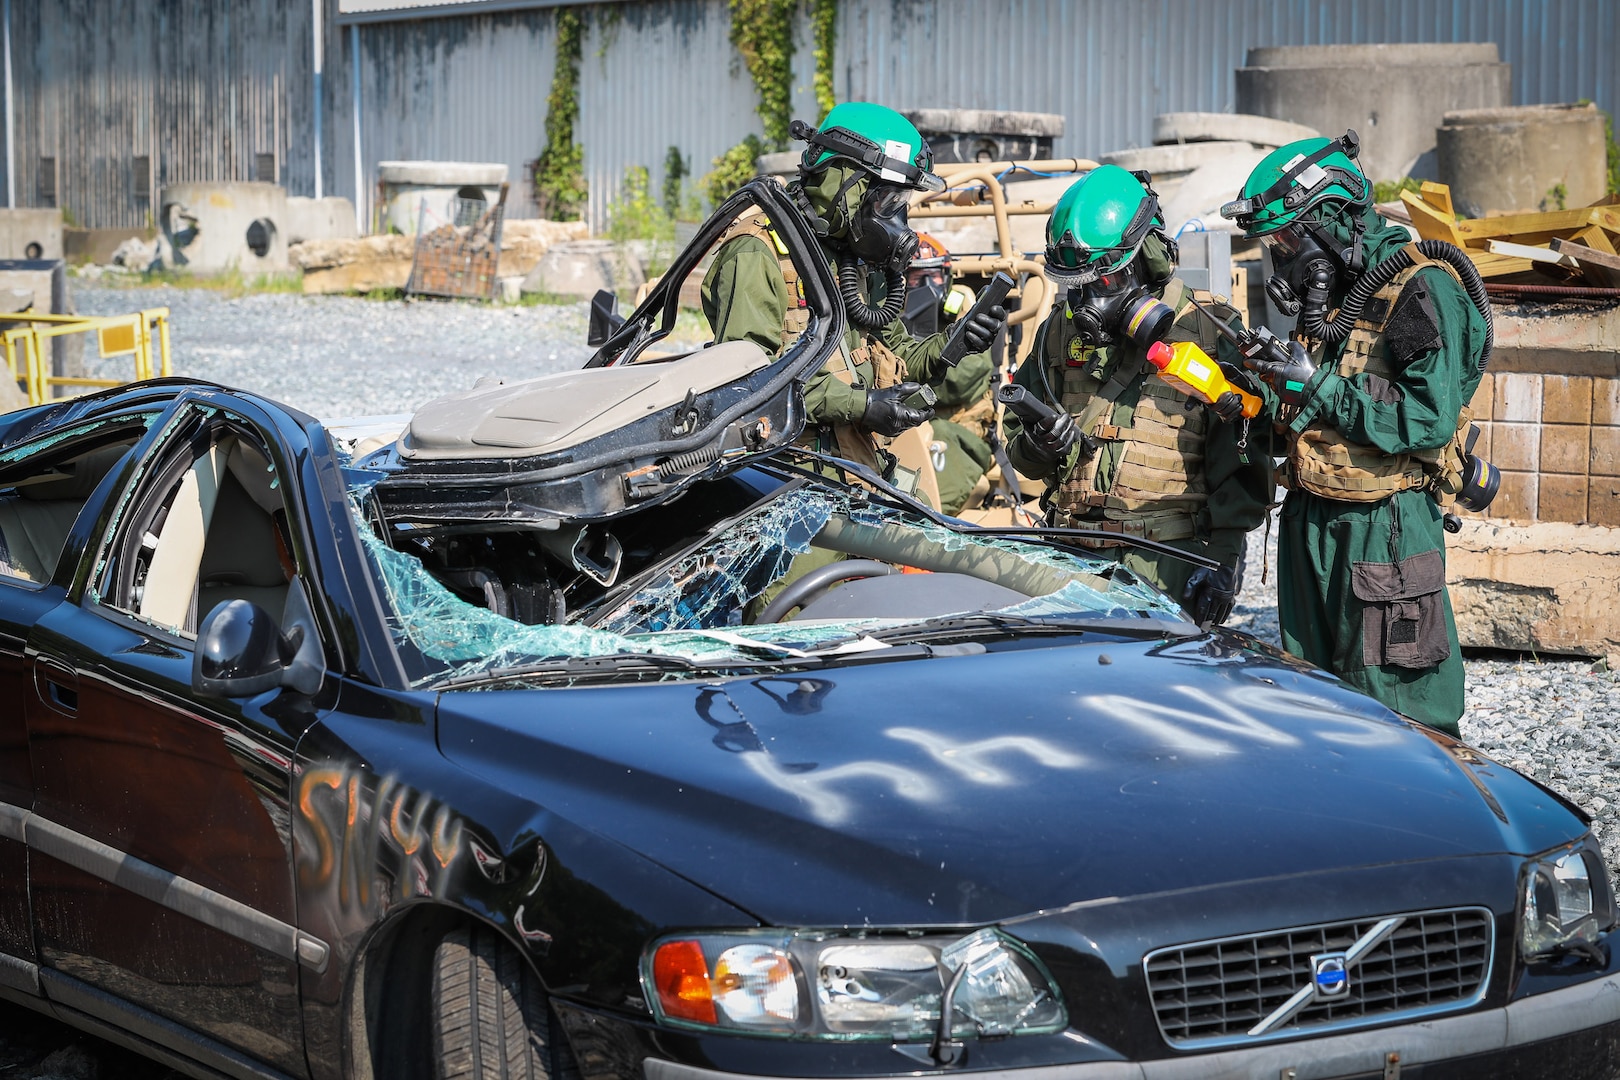 Chemical Biological Incident Response Force (CBIRF) Marines look for radiation hazards in an abandoned car using developmental equipment and compare the readings against their own equipment during the Technology Experimentation and Characterization Field Trials at the CBIRF Downey Responder Training Facility, July 26-30. The trials were cohosted by Naval Surface Warfare Center Indian Head Division Chemical, Biological and Radiological Defense Division and CBIRF. (U.S. Navy photo by Matthew Poynor)